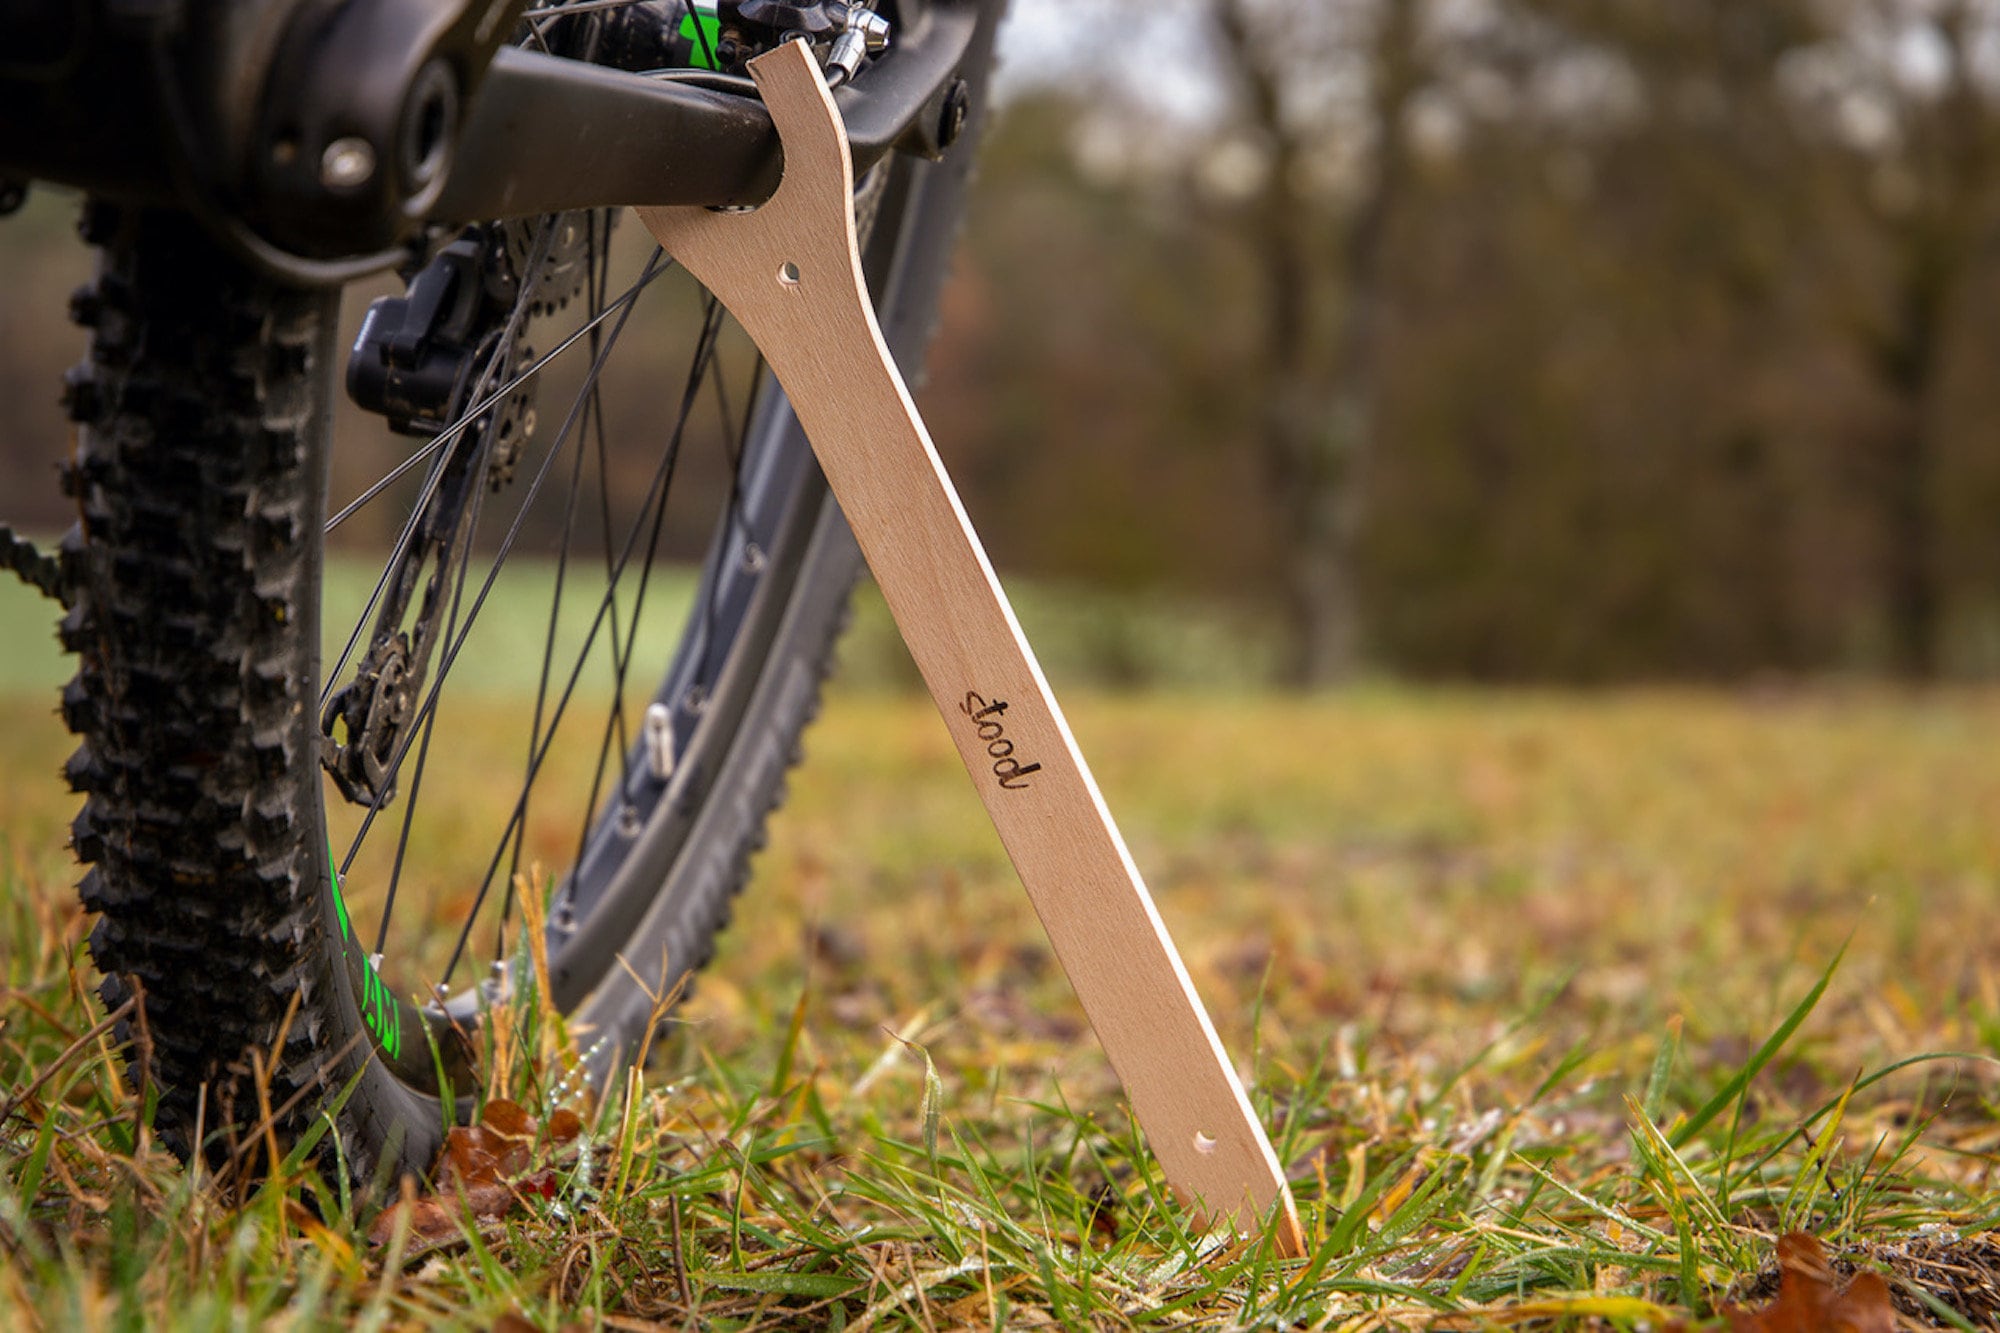 Bicycle Stand Made From Cherry Wood With Non Slip Rubber Feet. A Great  Solution for Showing off Your Bicycle With Style. 